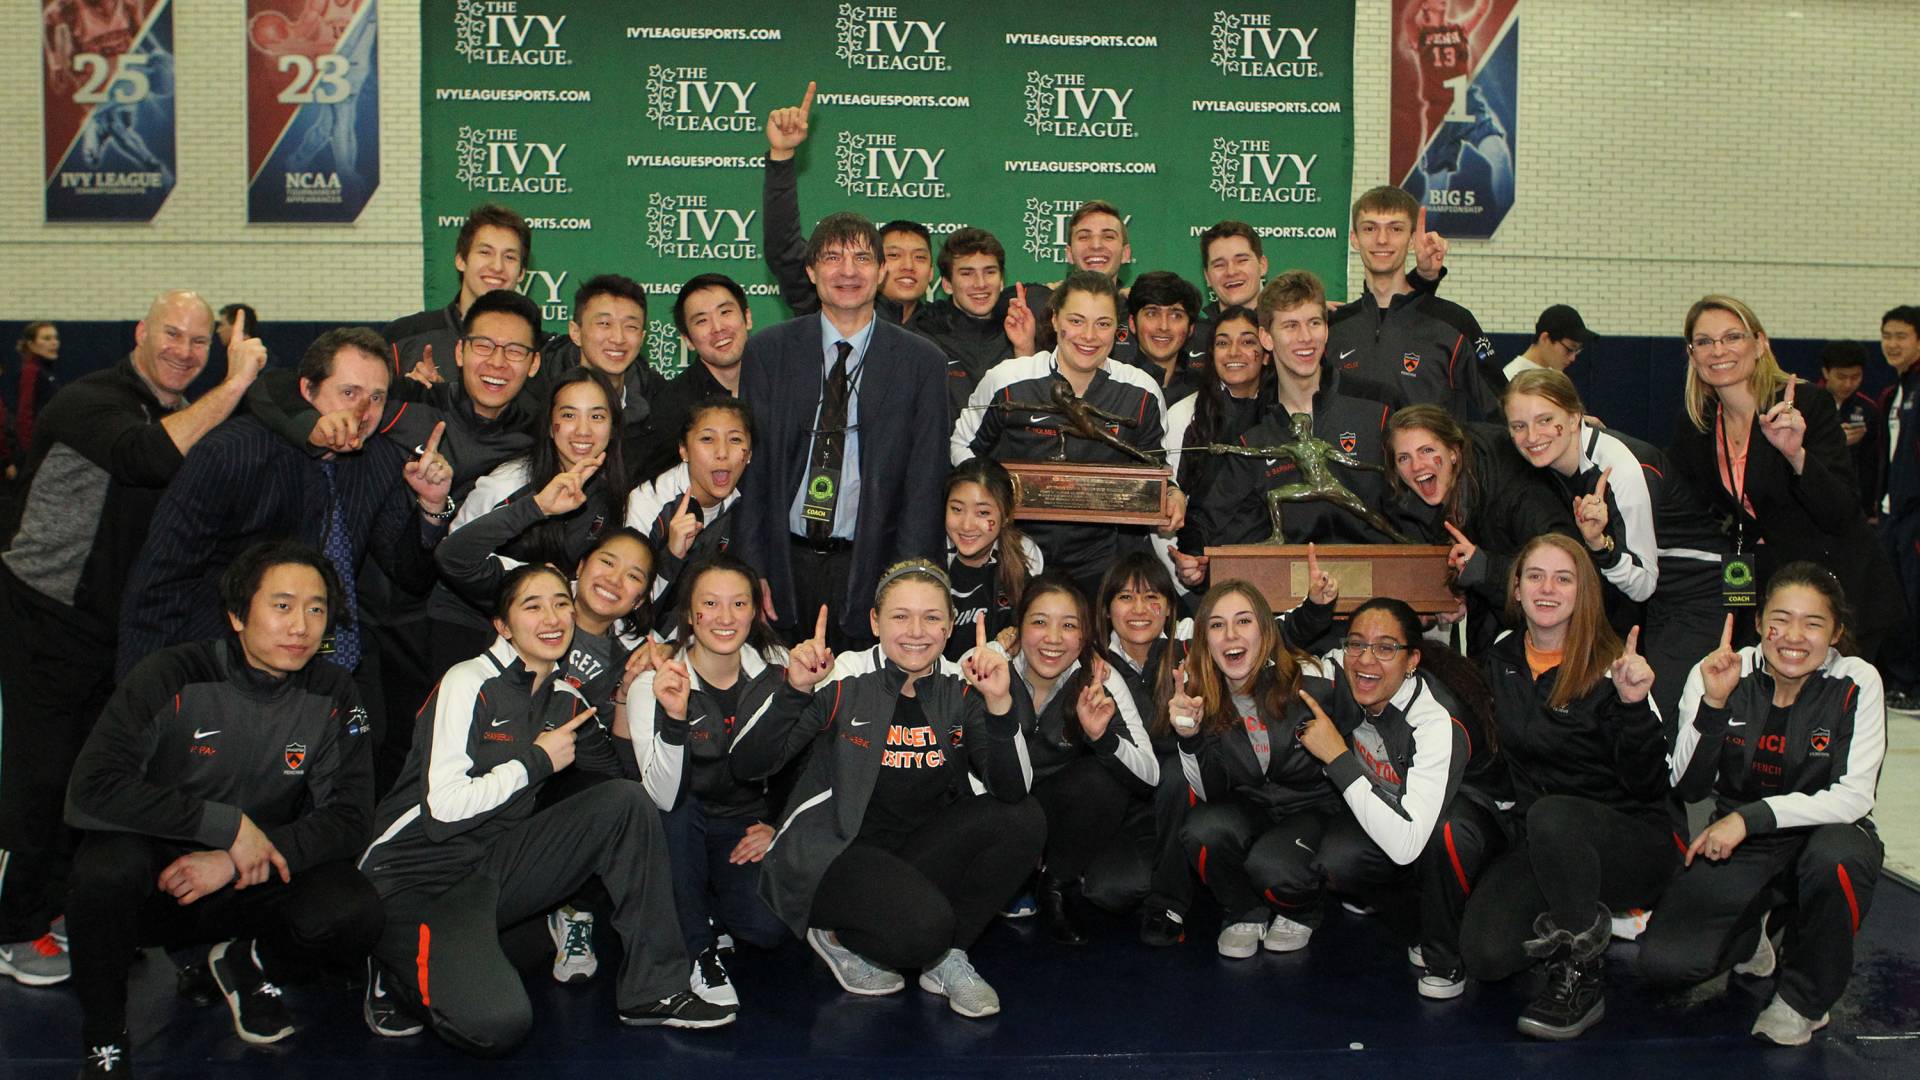 Princeton men's and women's fencing team poses with their championship trophies